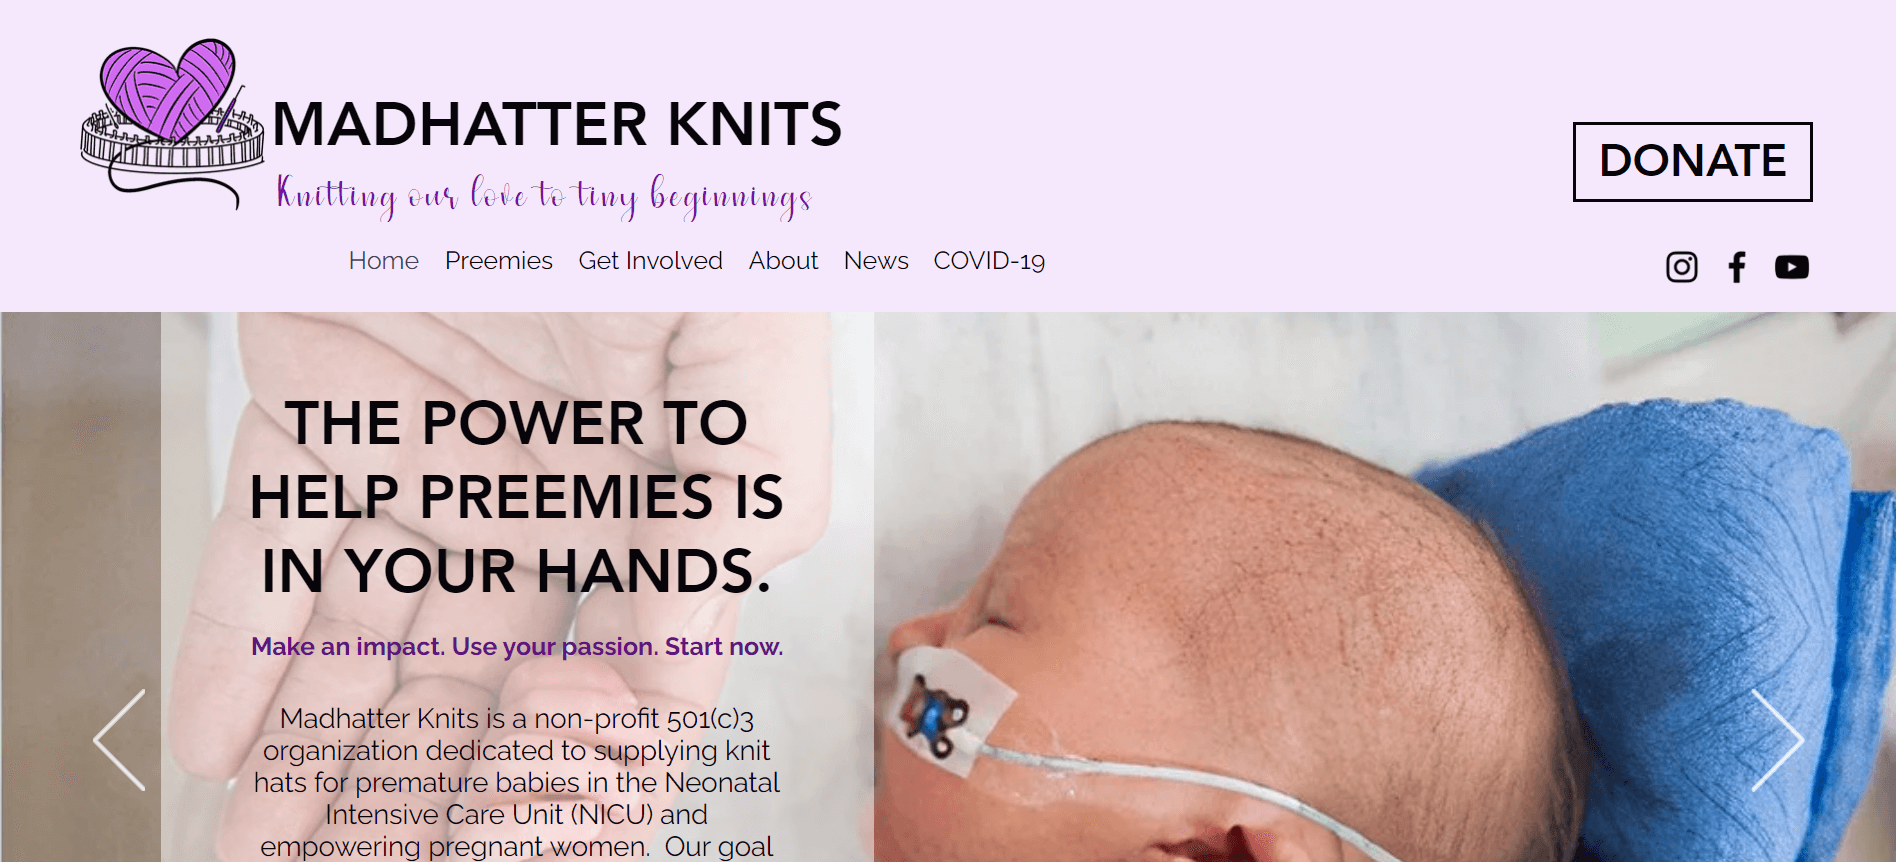 Madhatter knits homepage